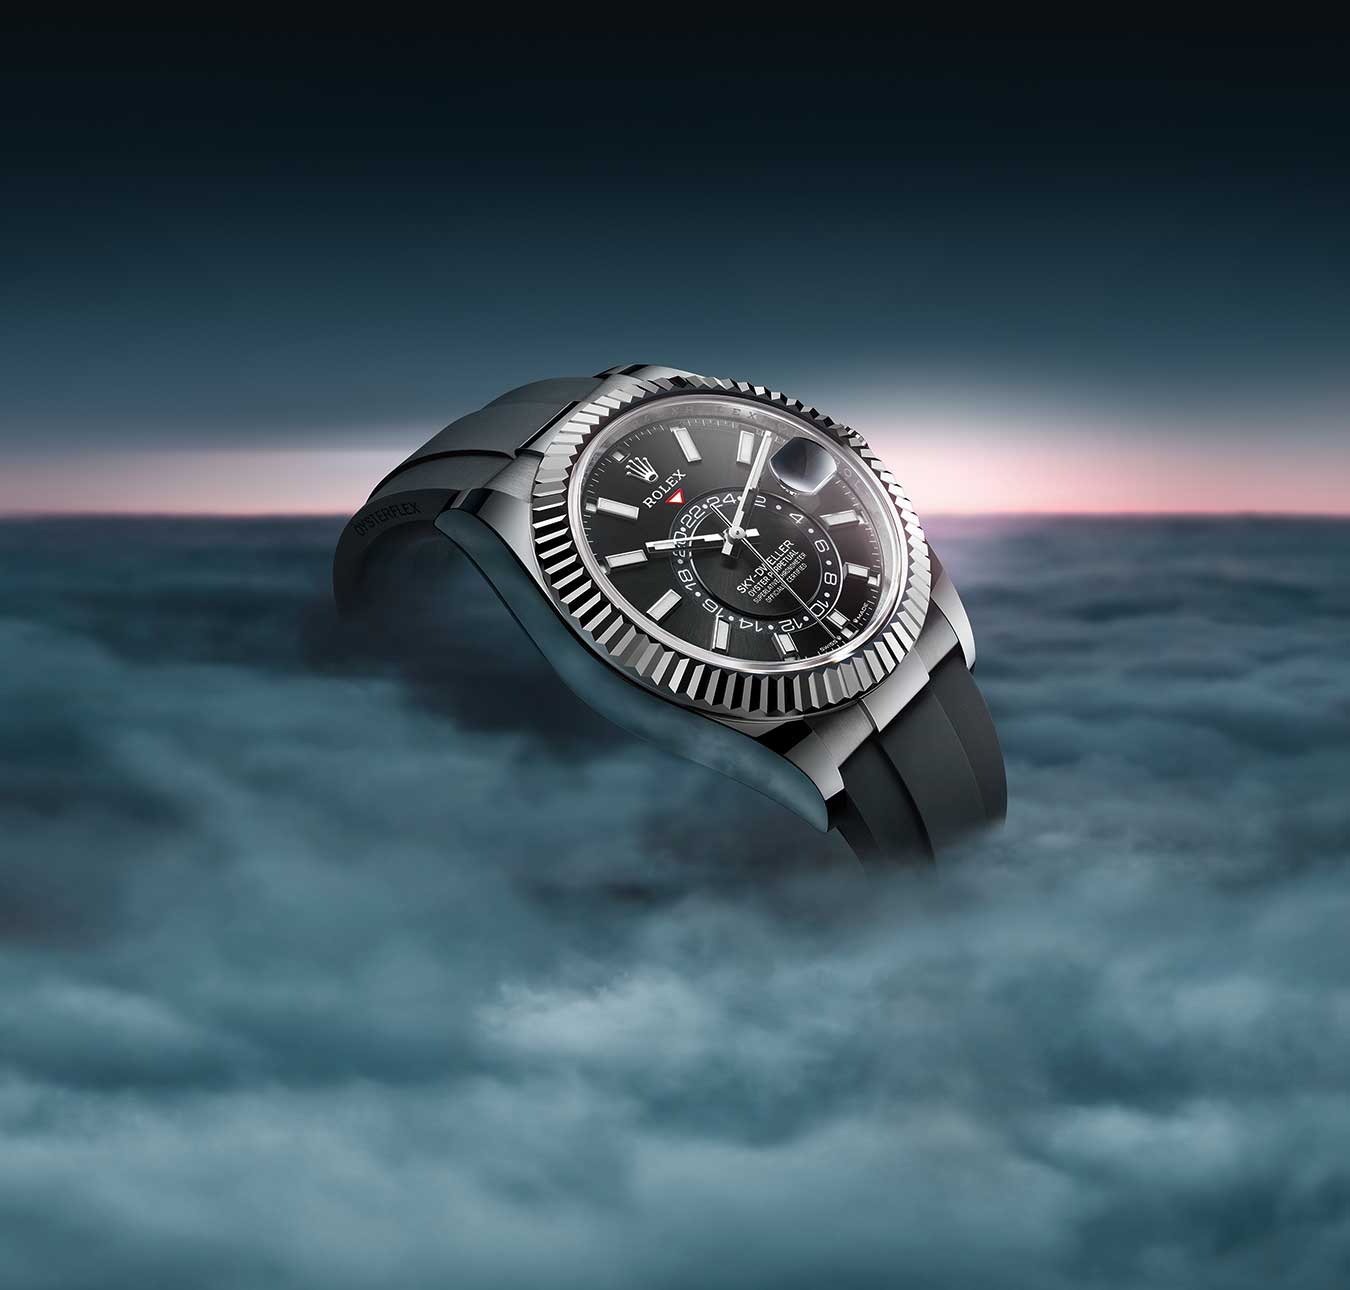 Rolex Sky-Dweller with Calibre 9002 in Clouds